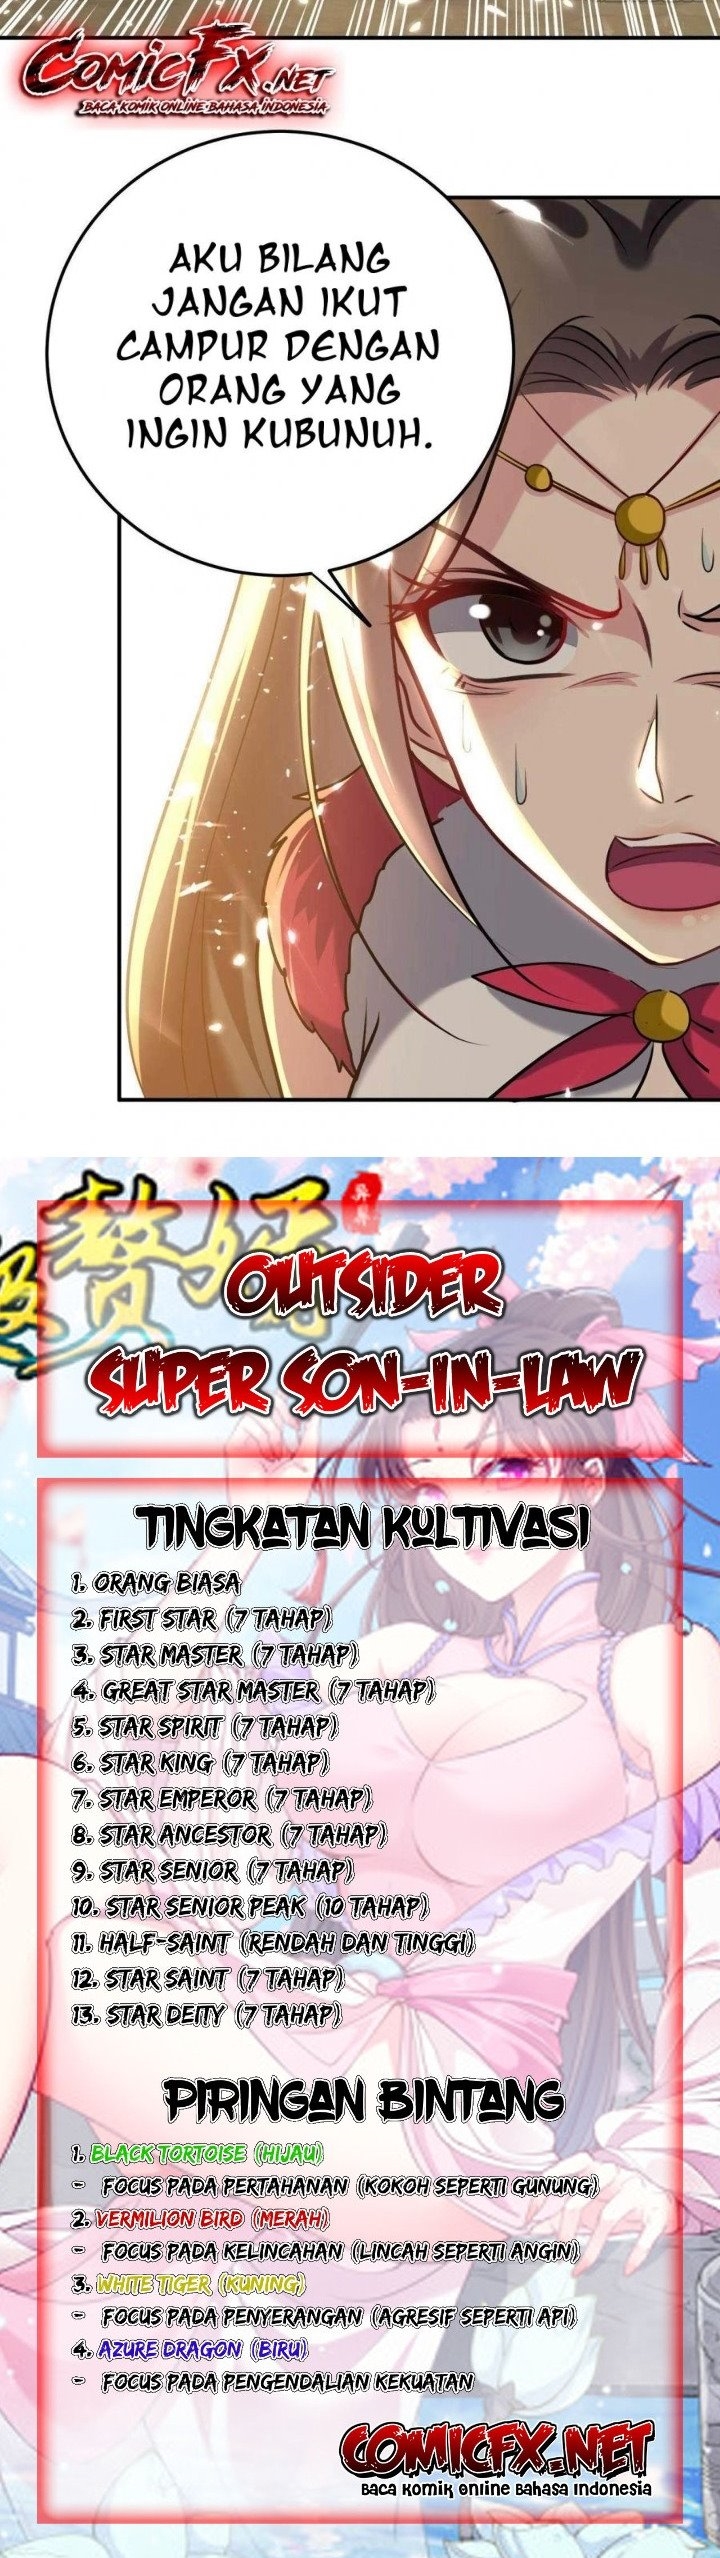 Outsider Super Son In Law Chapter 63